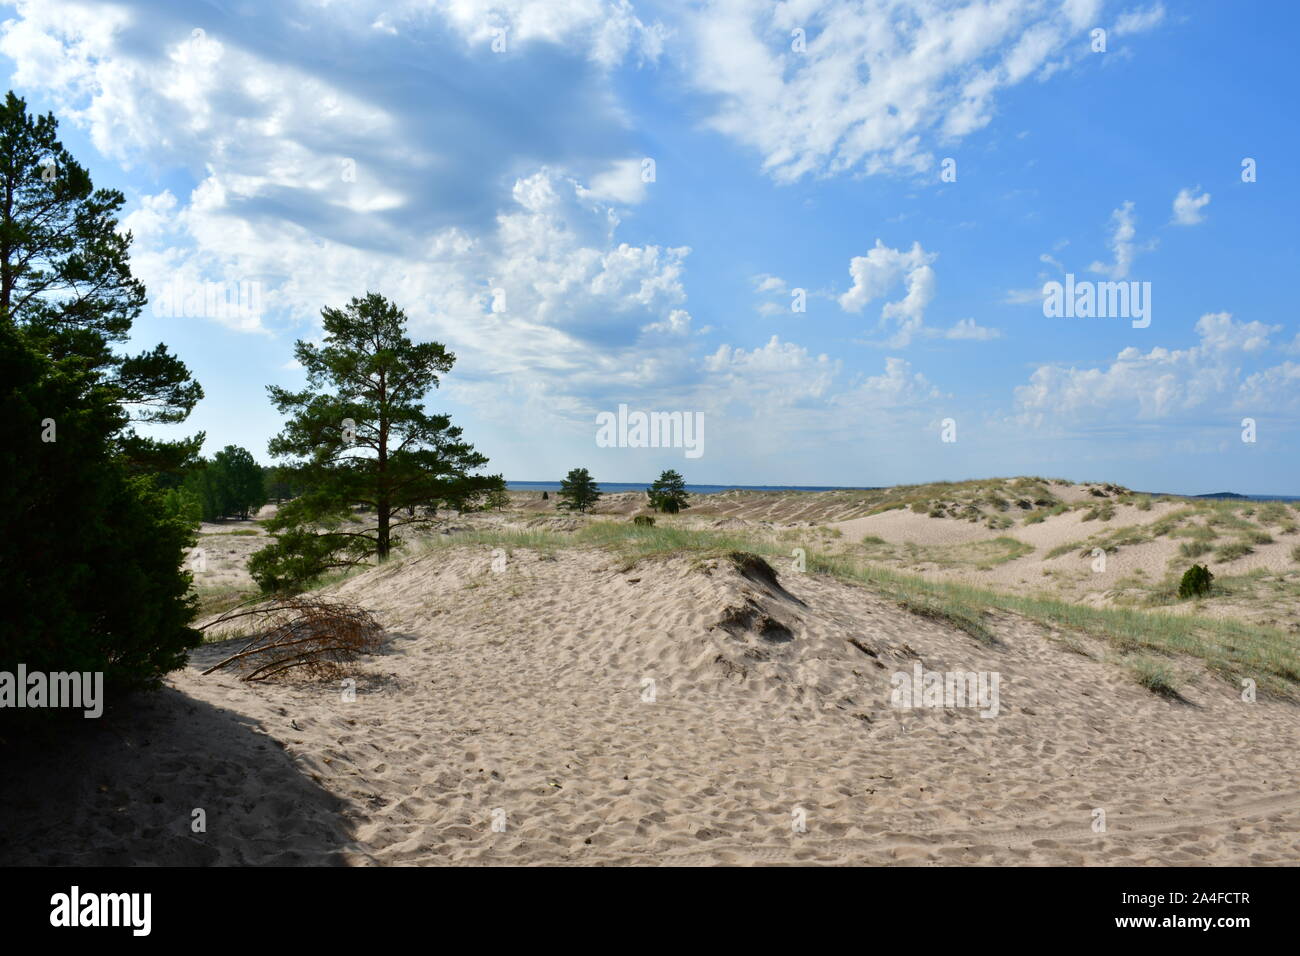 Trees growing in dune beach in Finland Stock Photo